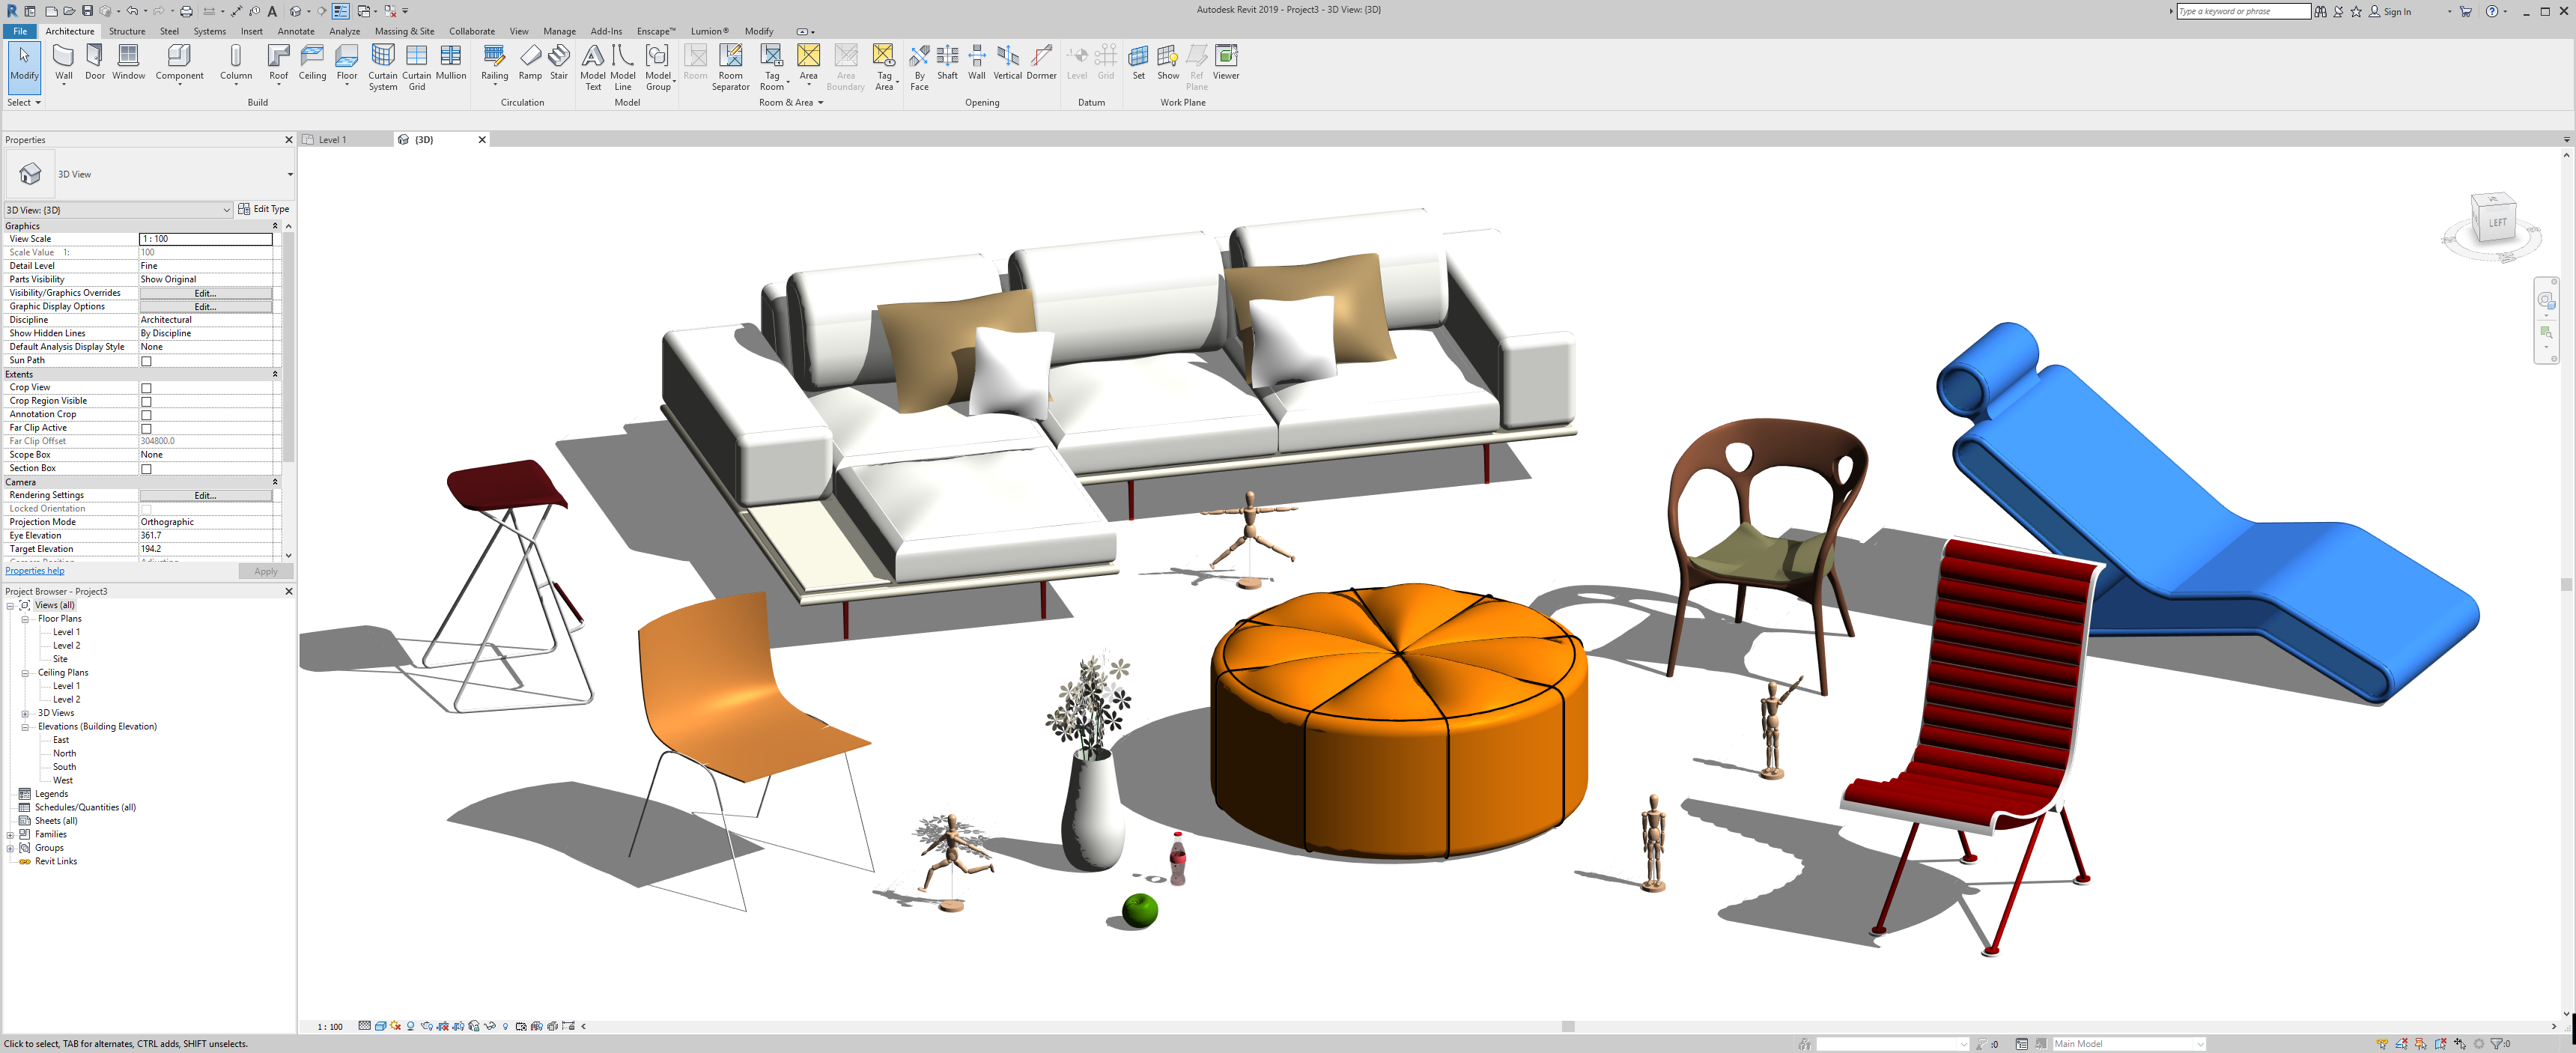 How to build furniture in revit 2017